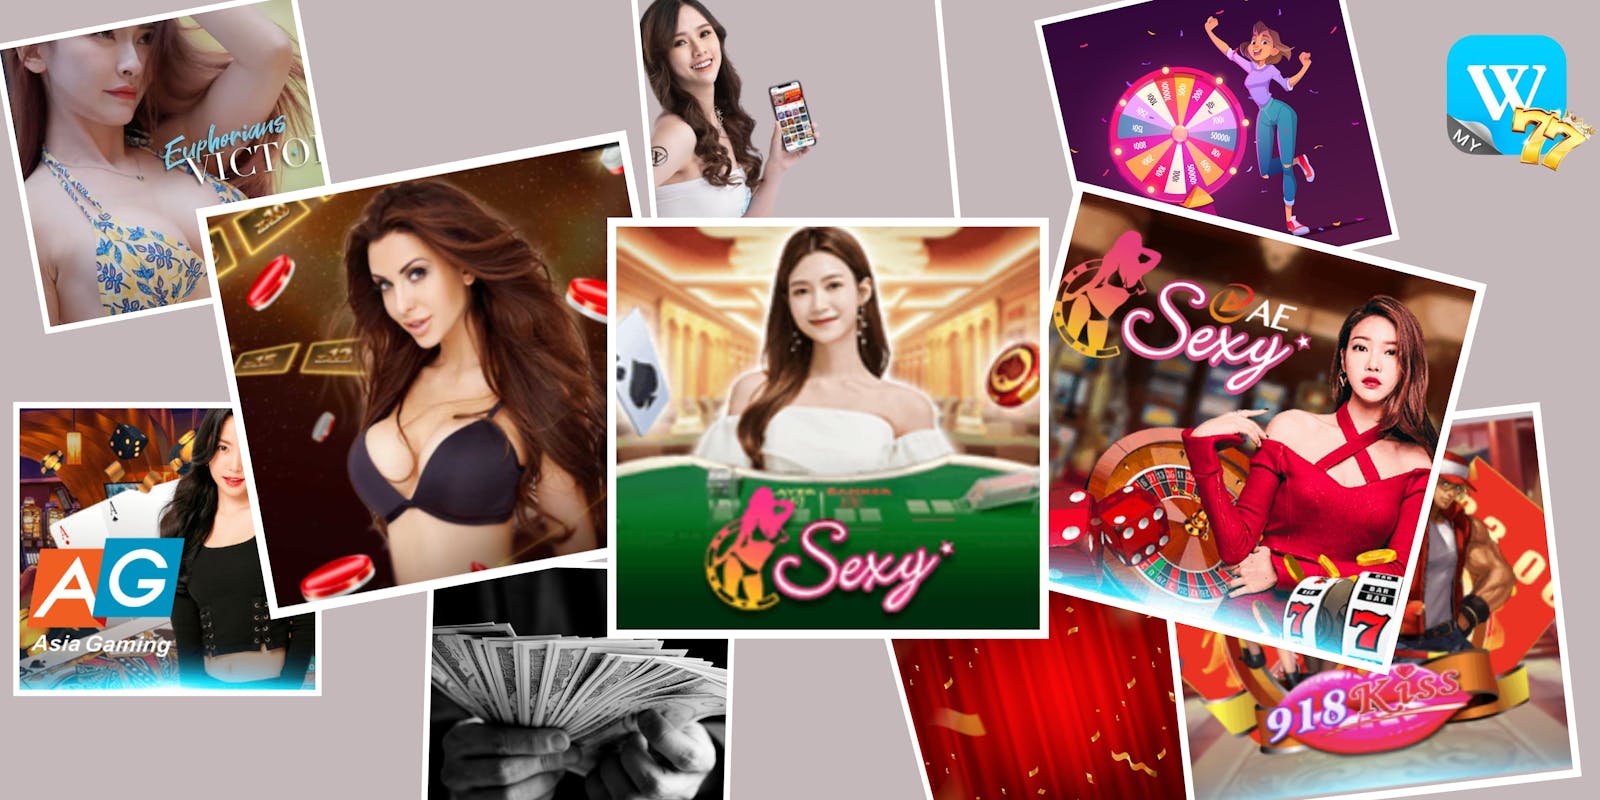 Play AE Sexy game at Winbox Wonders for an unforgettable and thrilling experience!